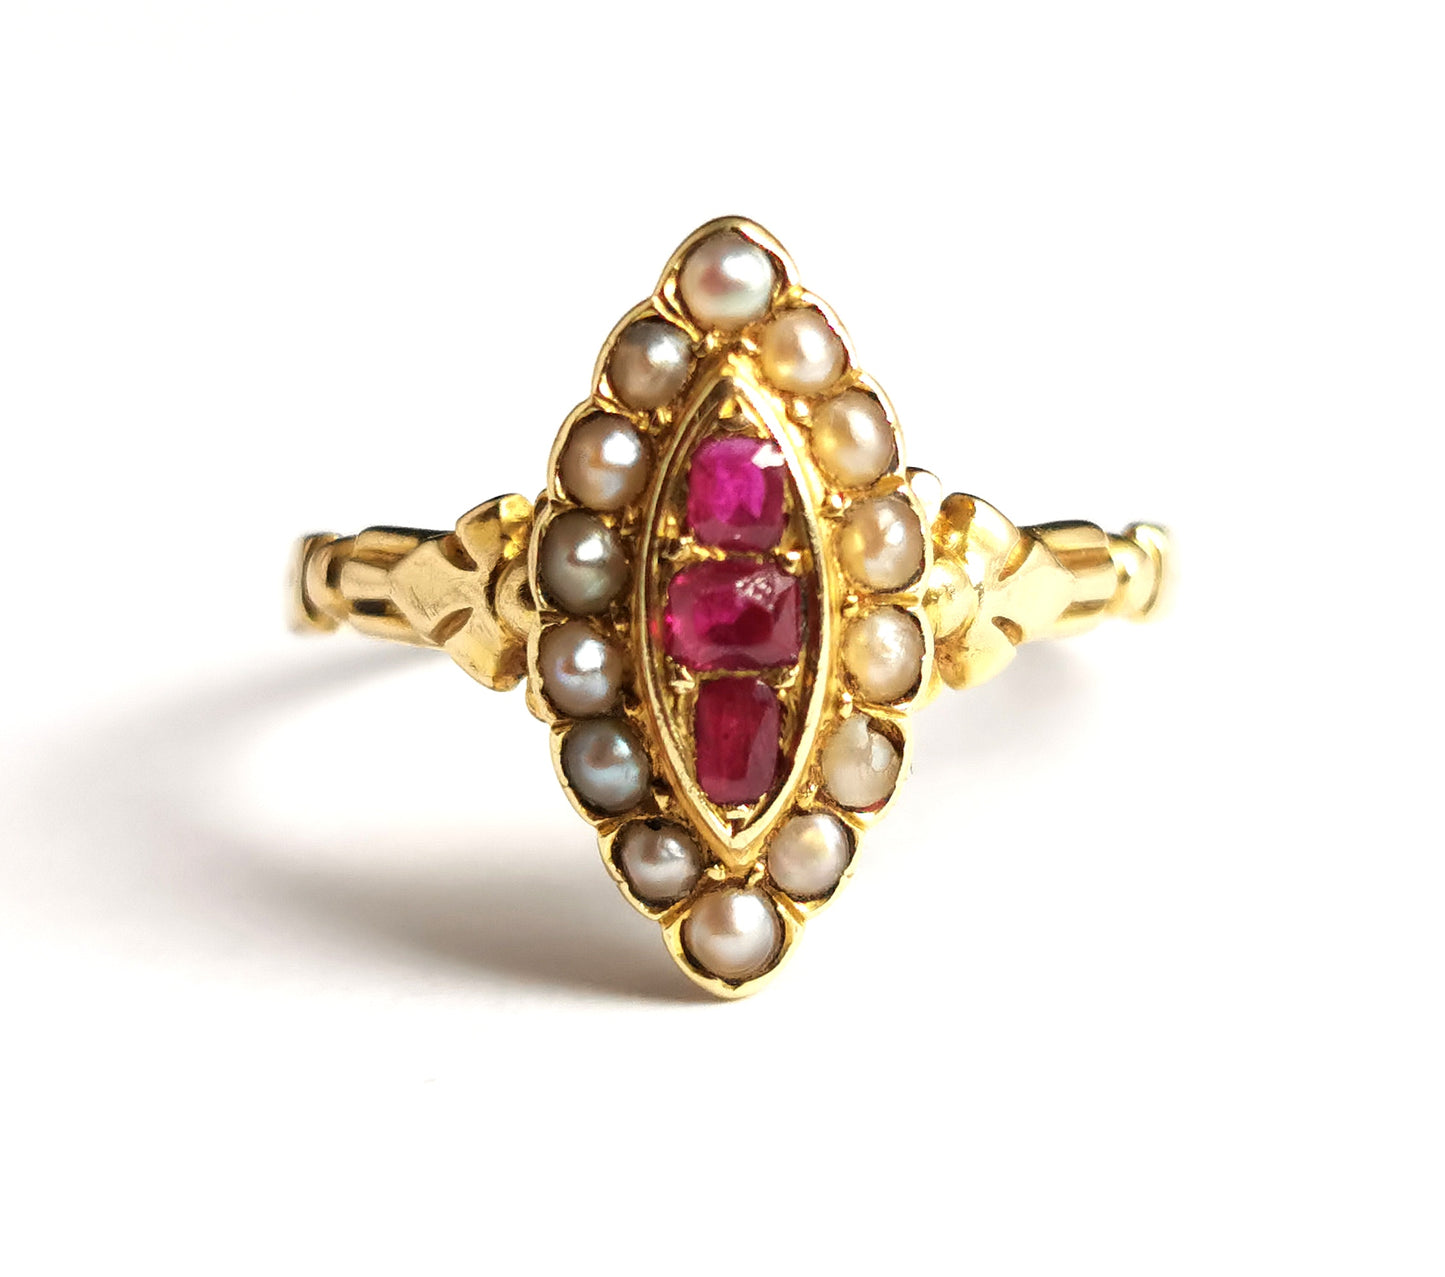 Antique Ruby and pearl navette ring, 18ct gold, Victorian